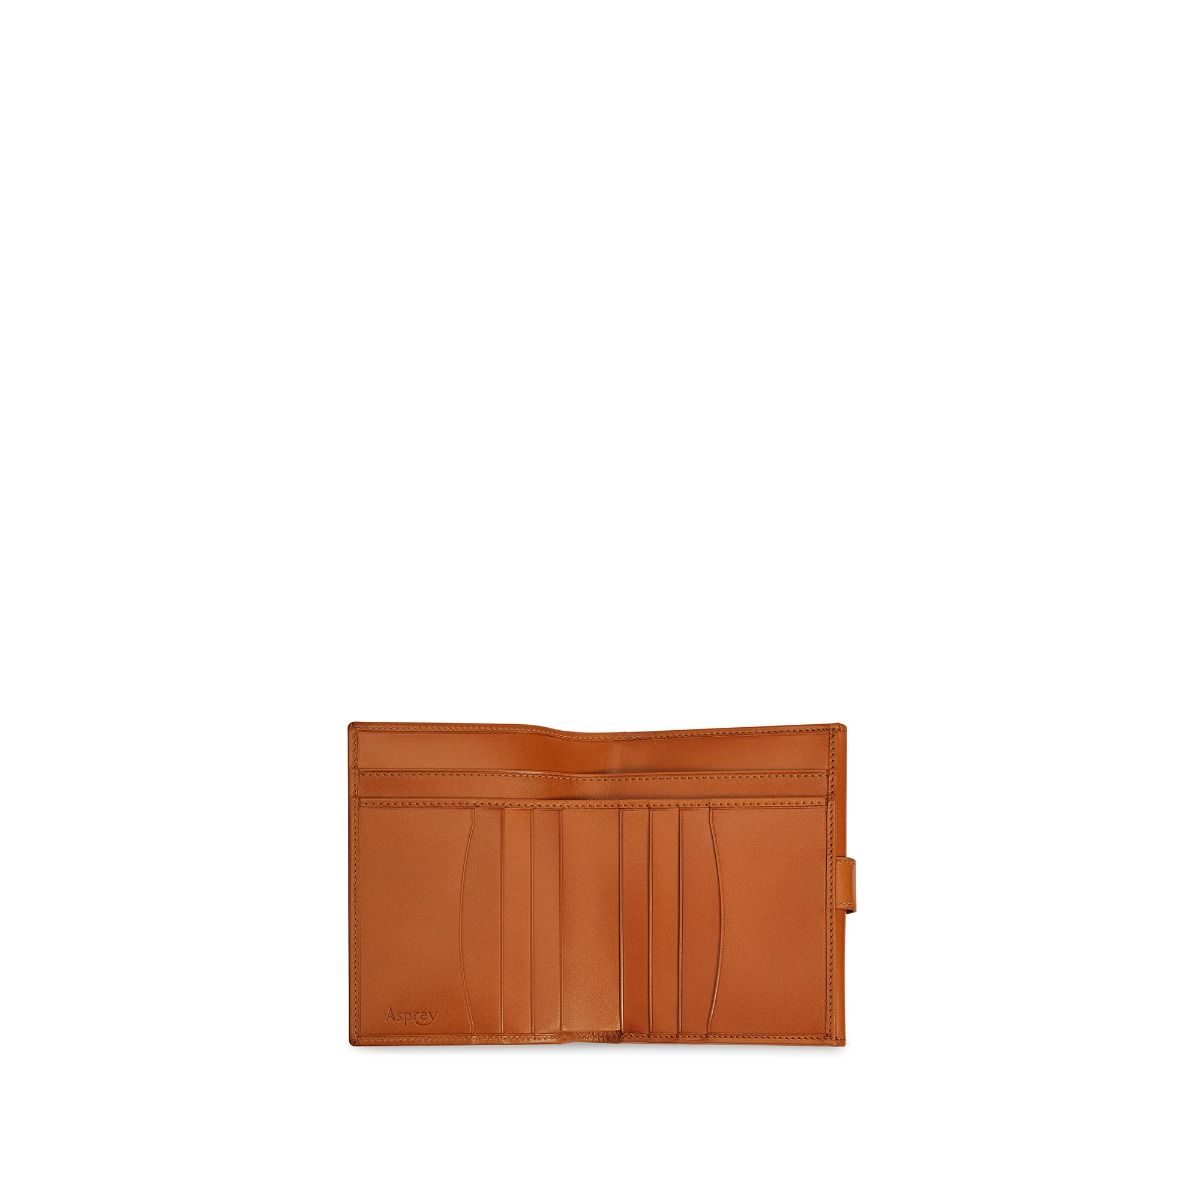 Grafton French Purse in Saddle Leather